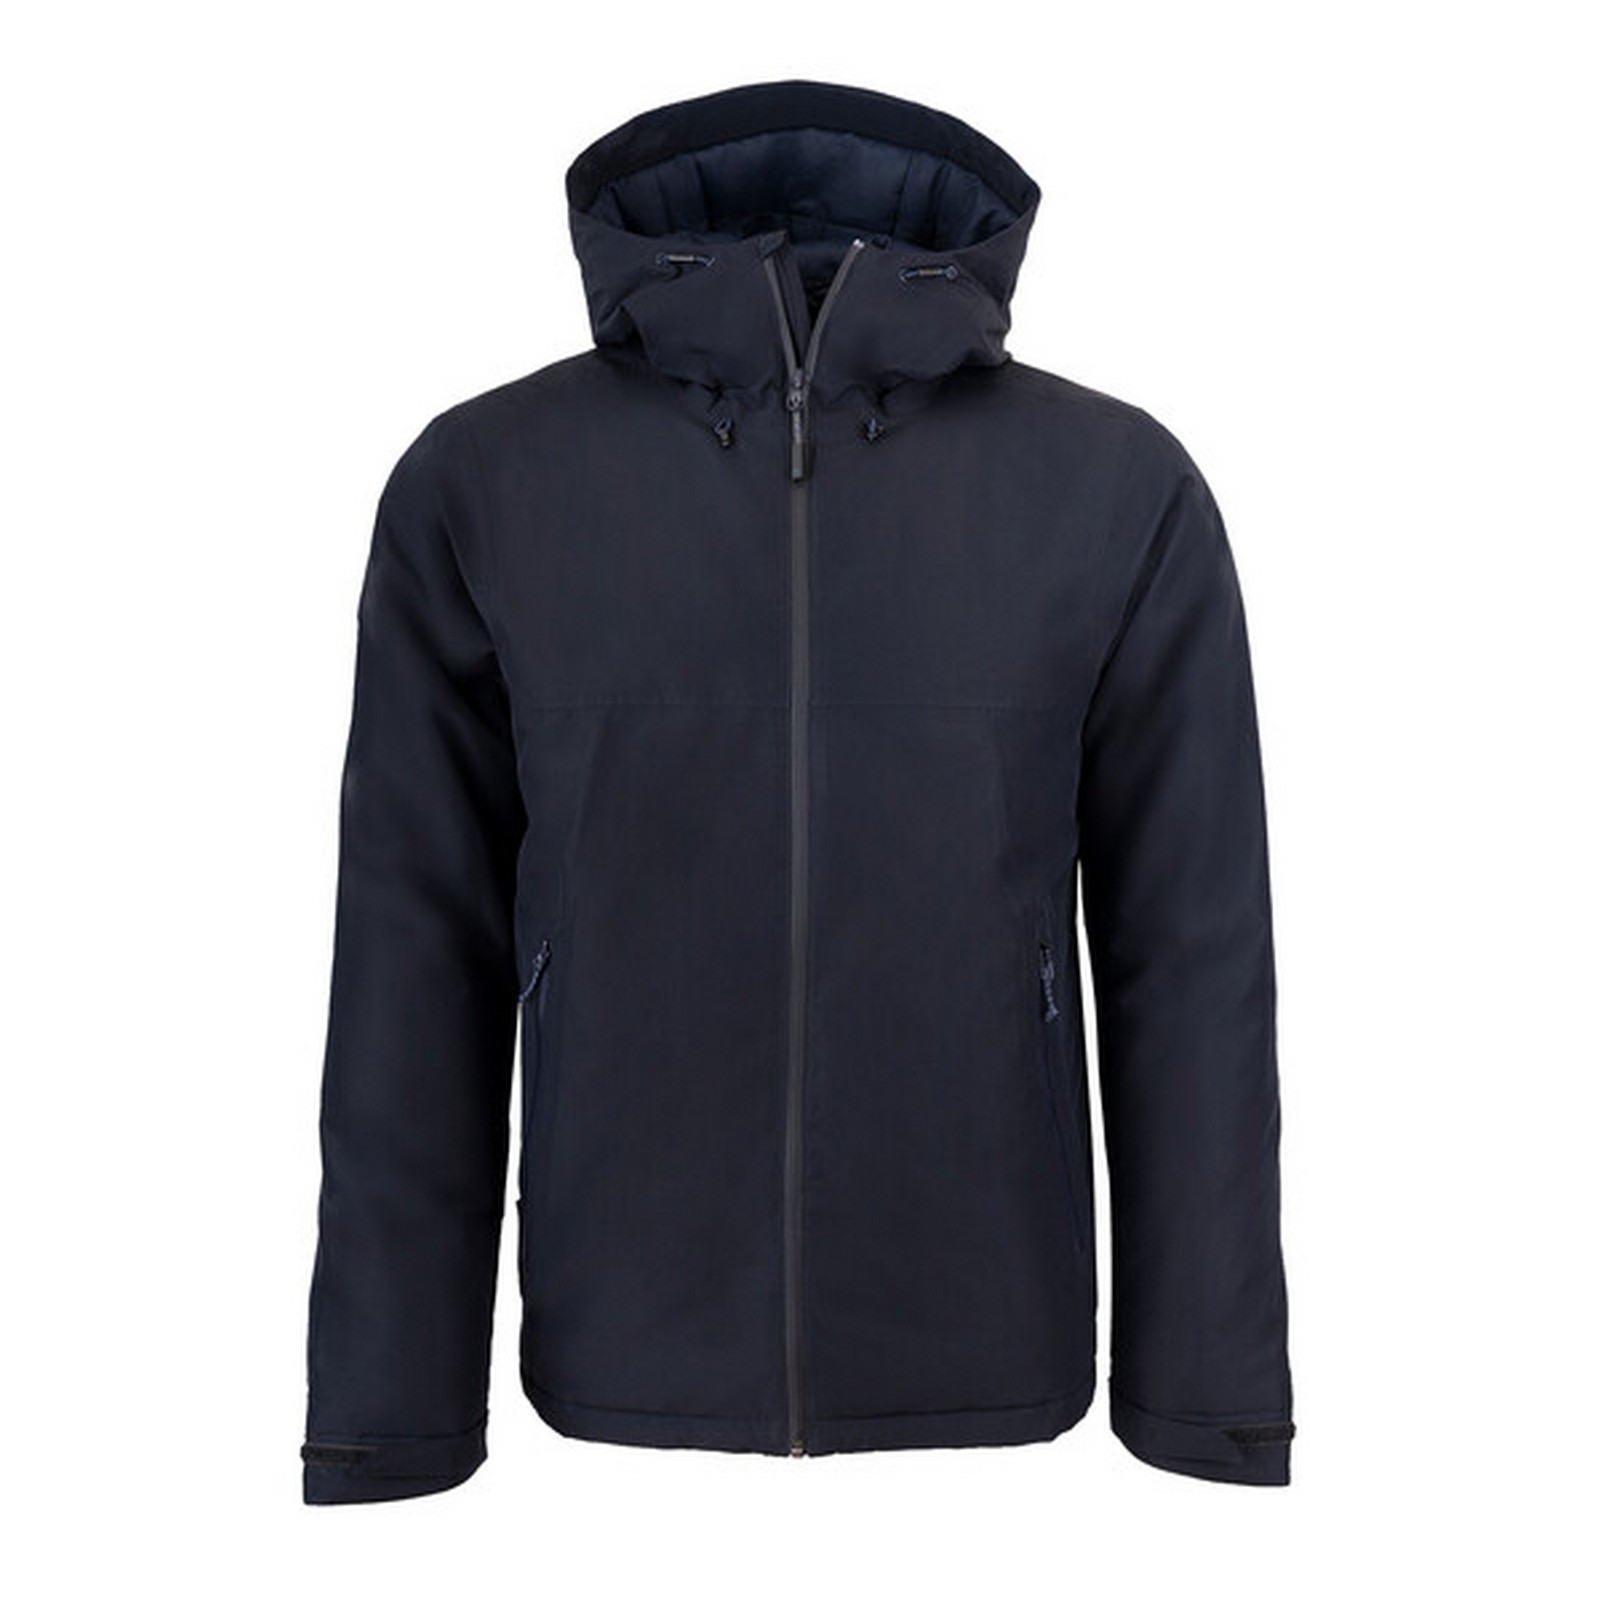 Craghoppers Kiwi Thermic insulated jacket | WISE Worksafe